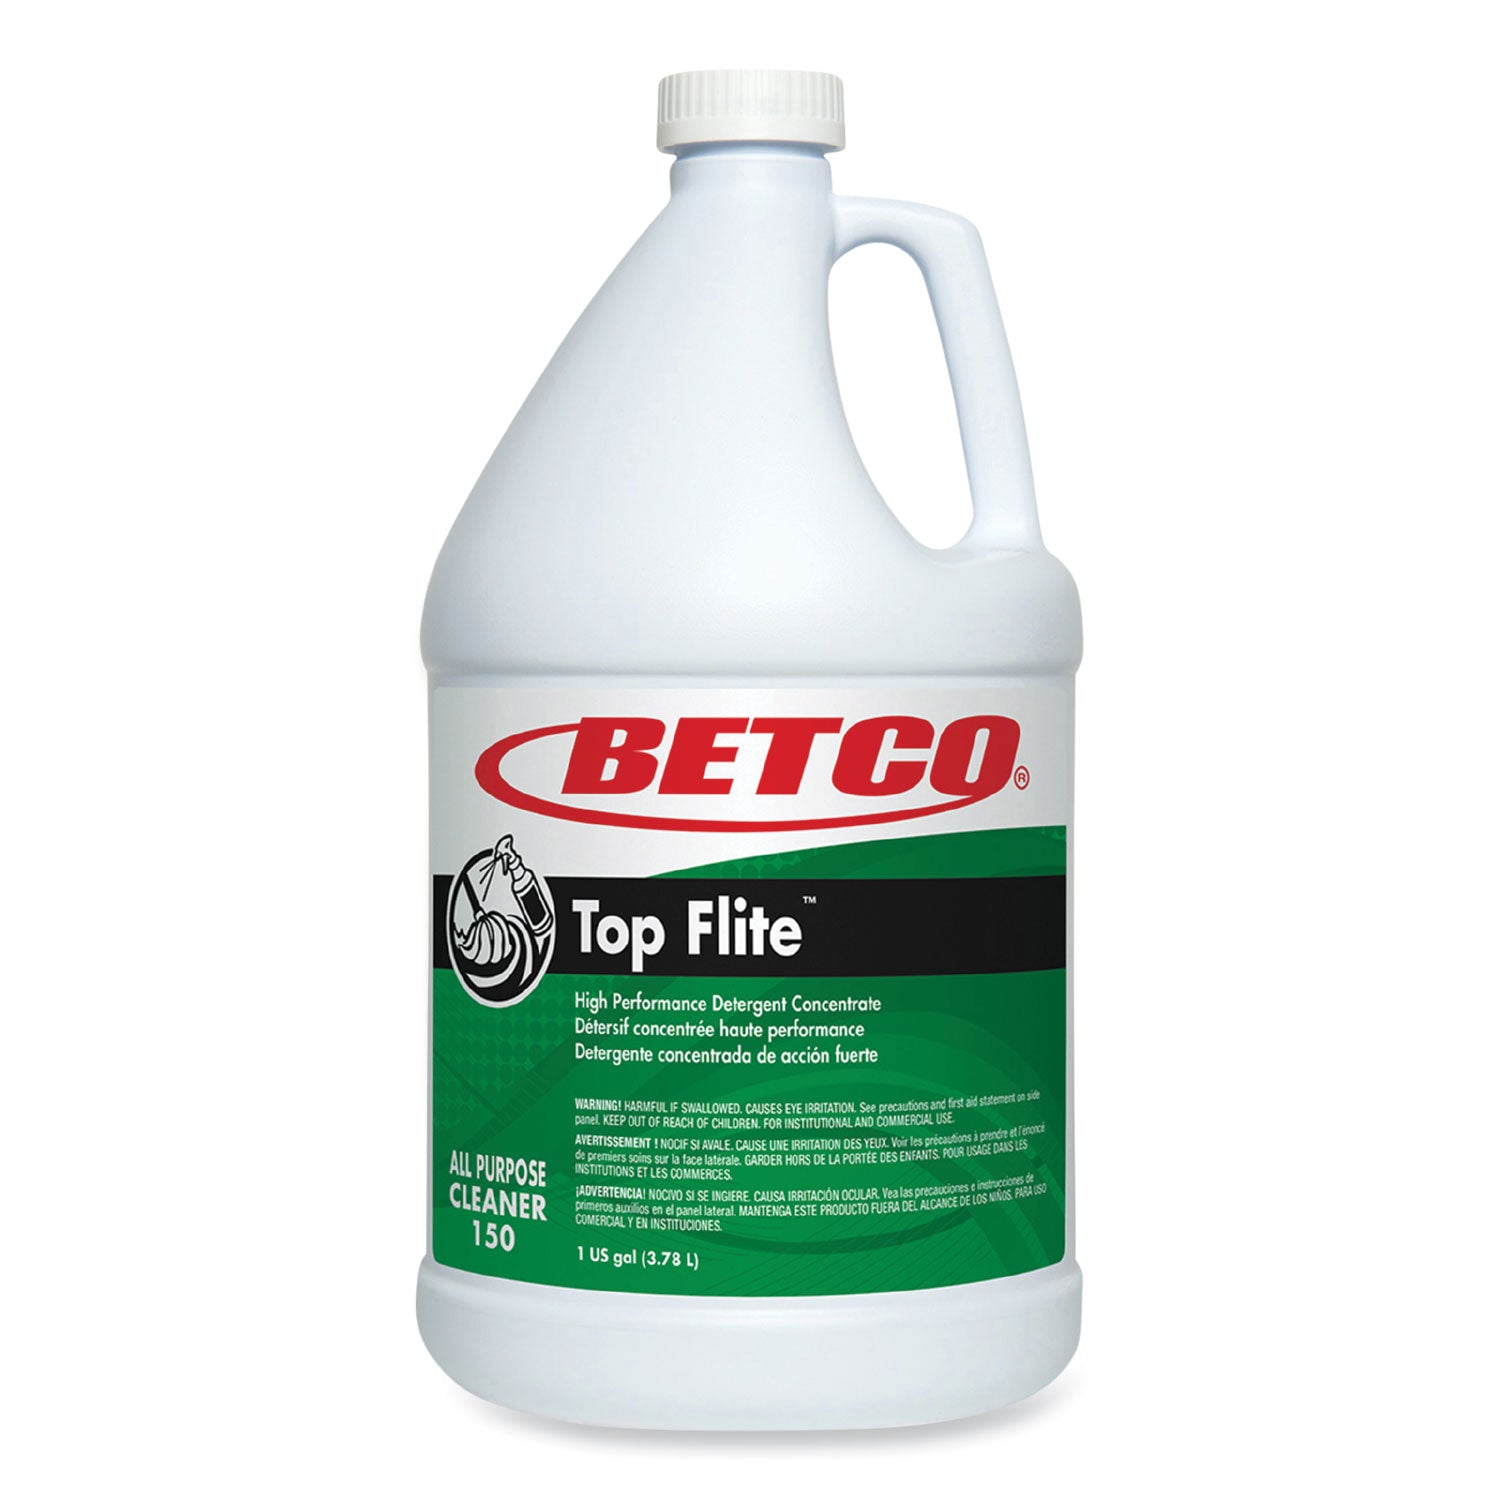 top-flite-all-purpose-cleaner-mint-scent-1-gal-bottle-4-carton_bet1500400 - 1